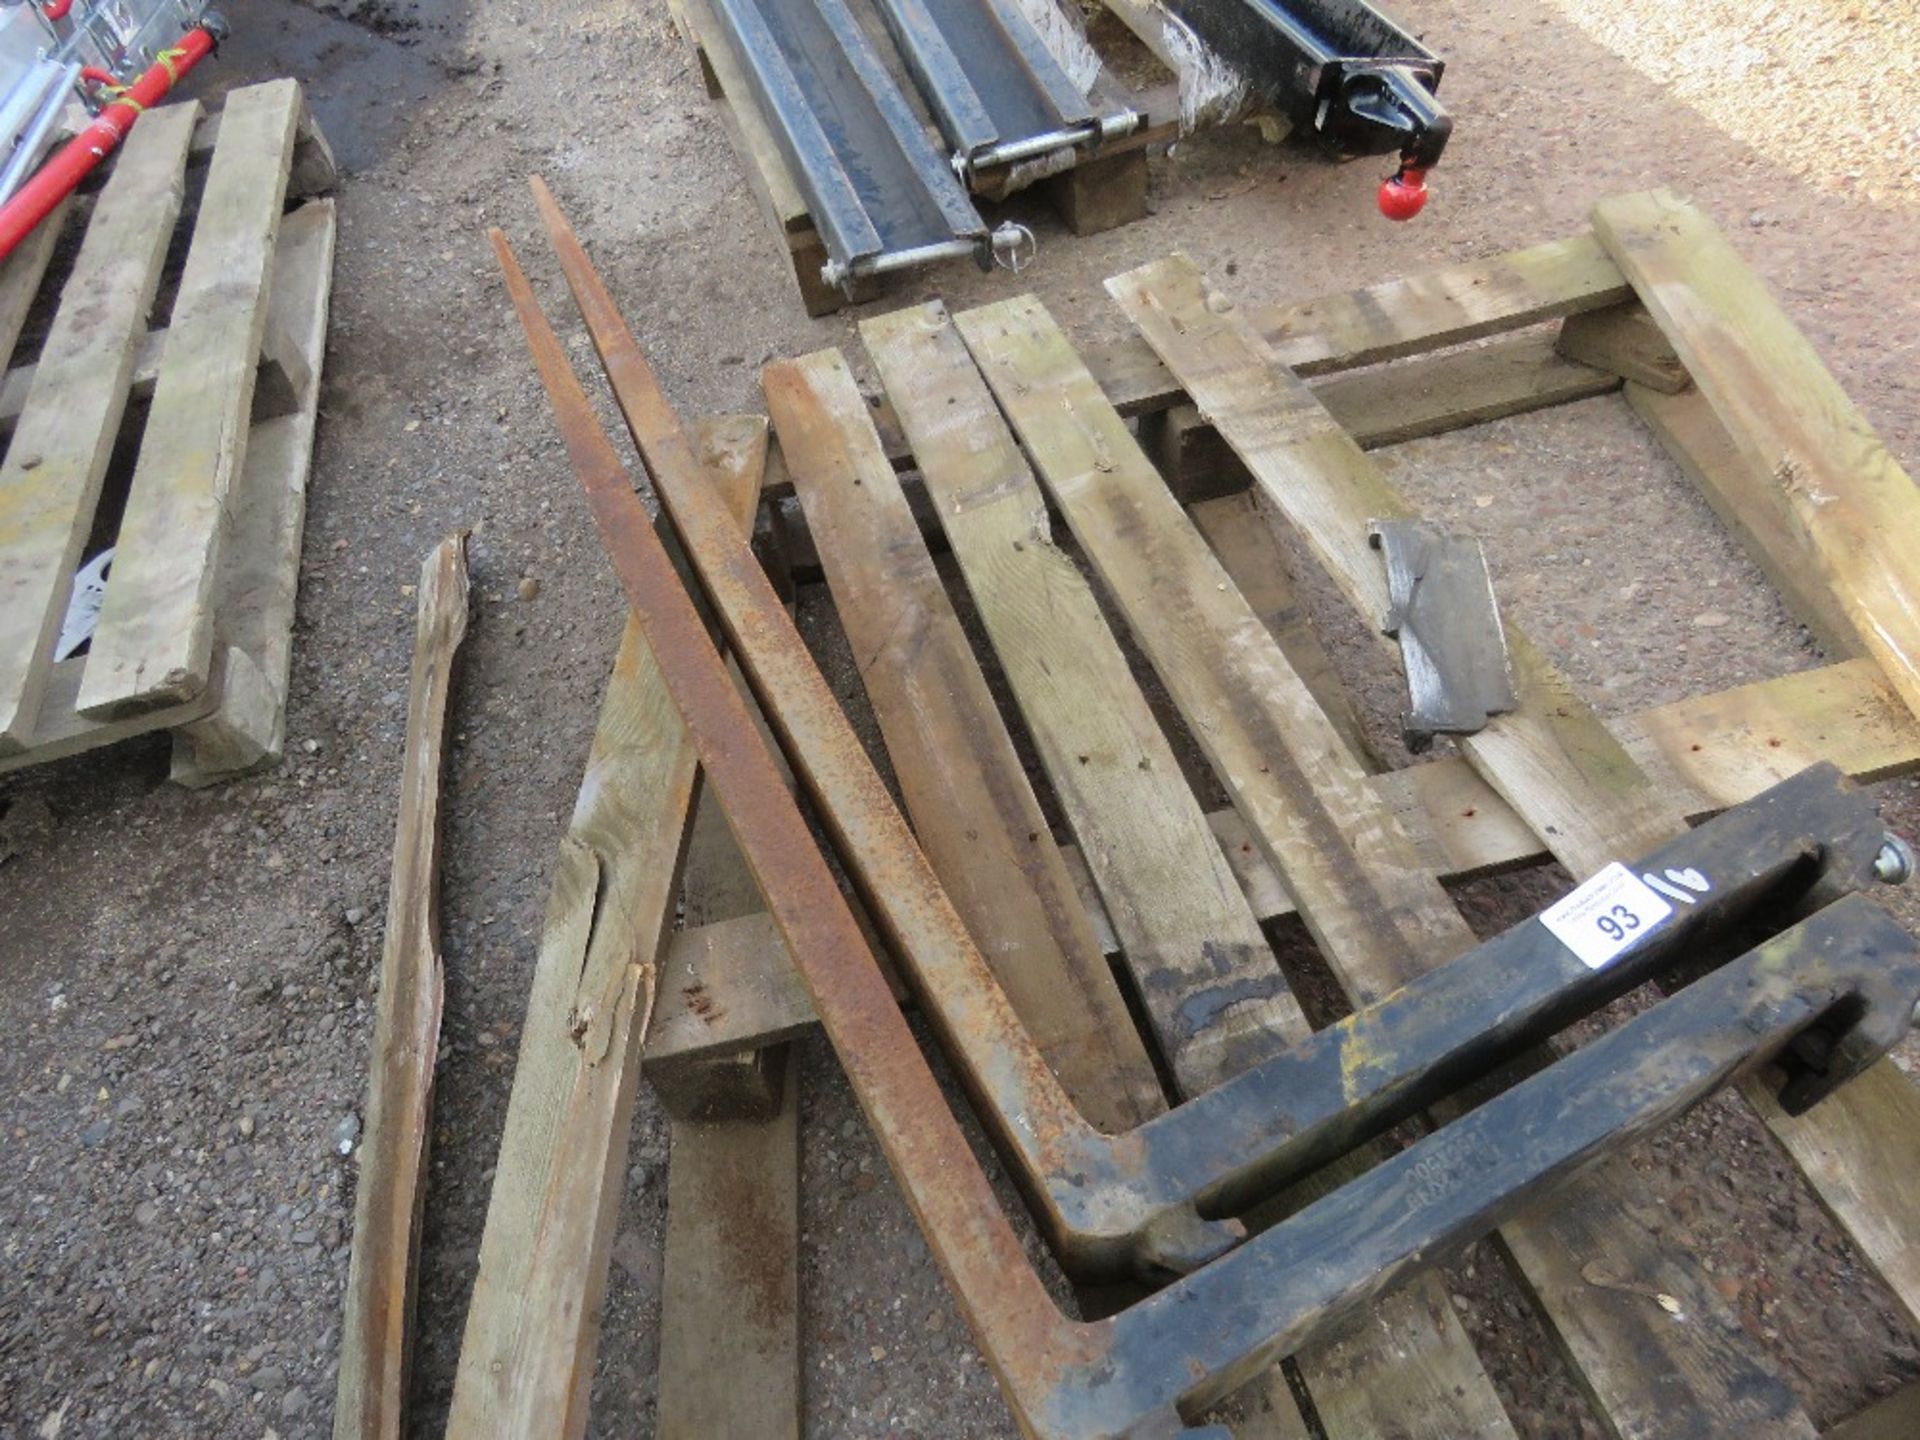 PAIR OF FORKLIFT TINES FOR 16" CARRIAGE. - Image 3 of 3